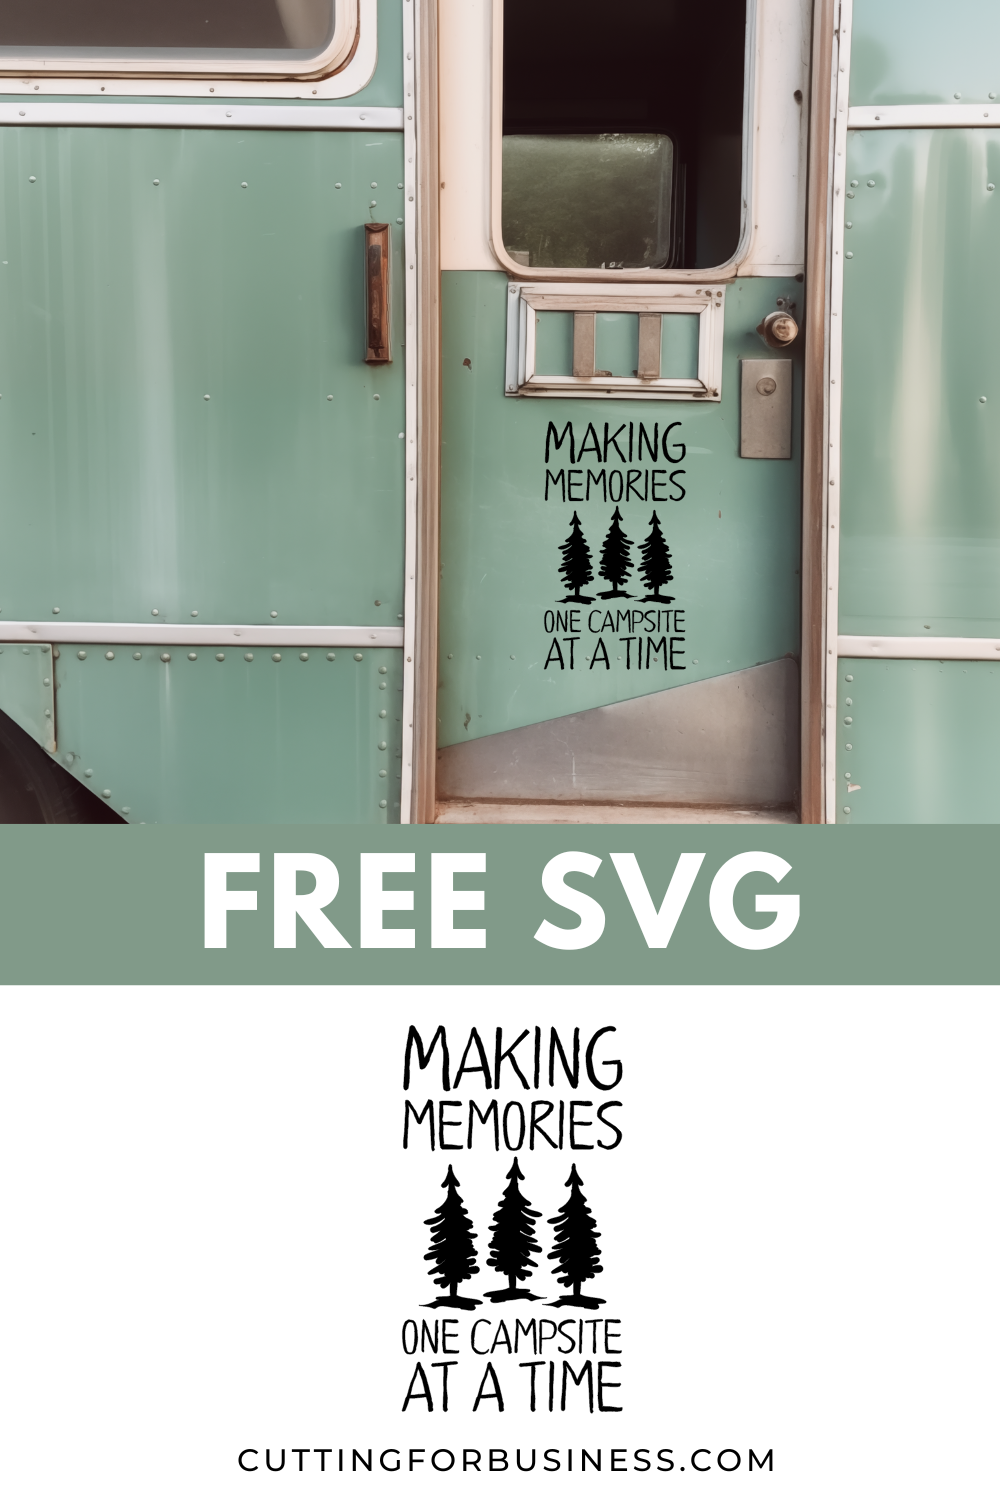 Free RV Camping SVG - Making Memories One Campsite at a Time - cuttingforbusiness.com